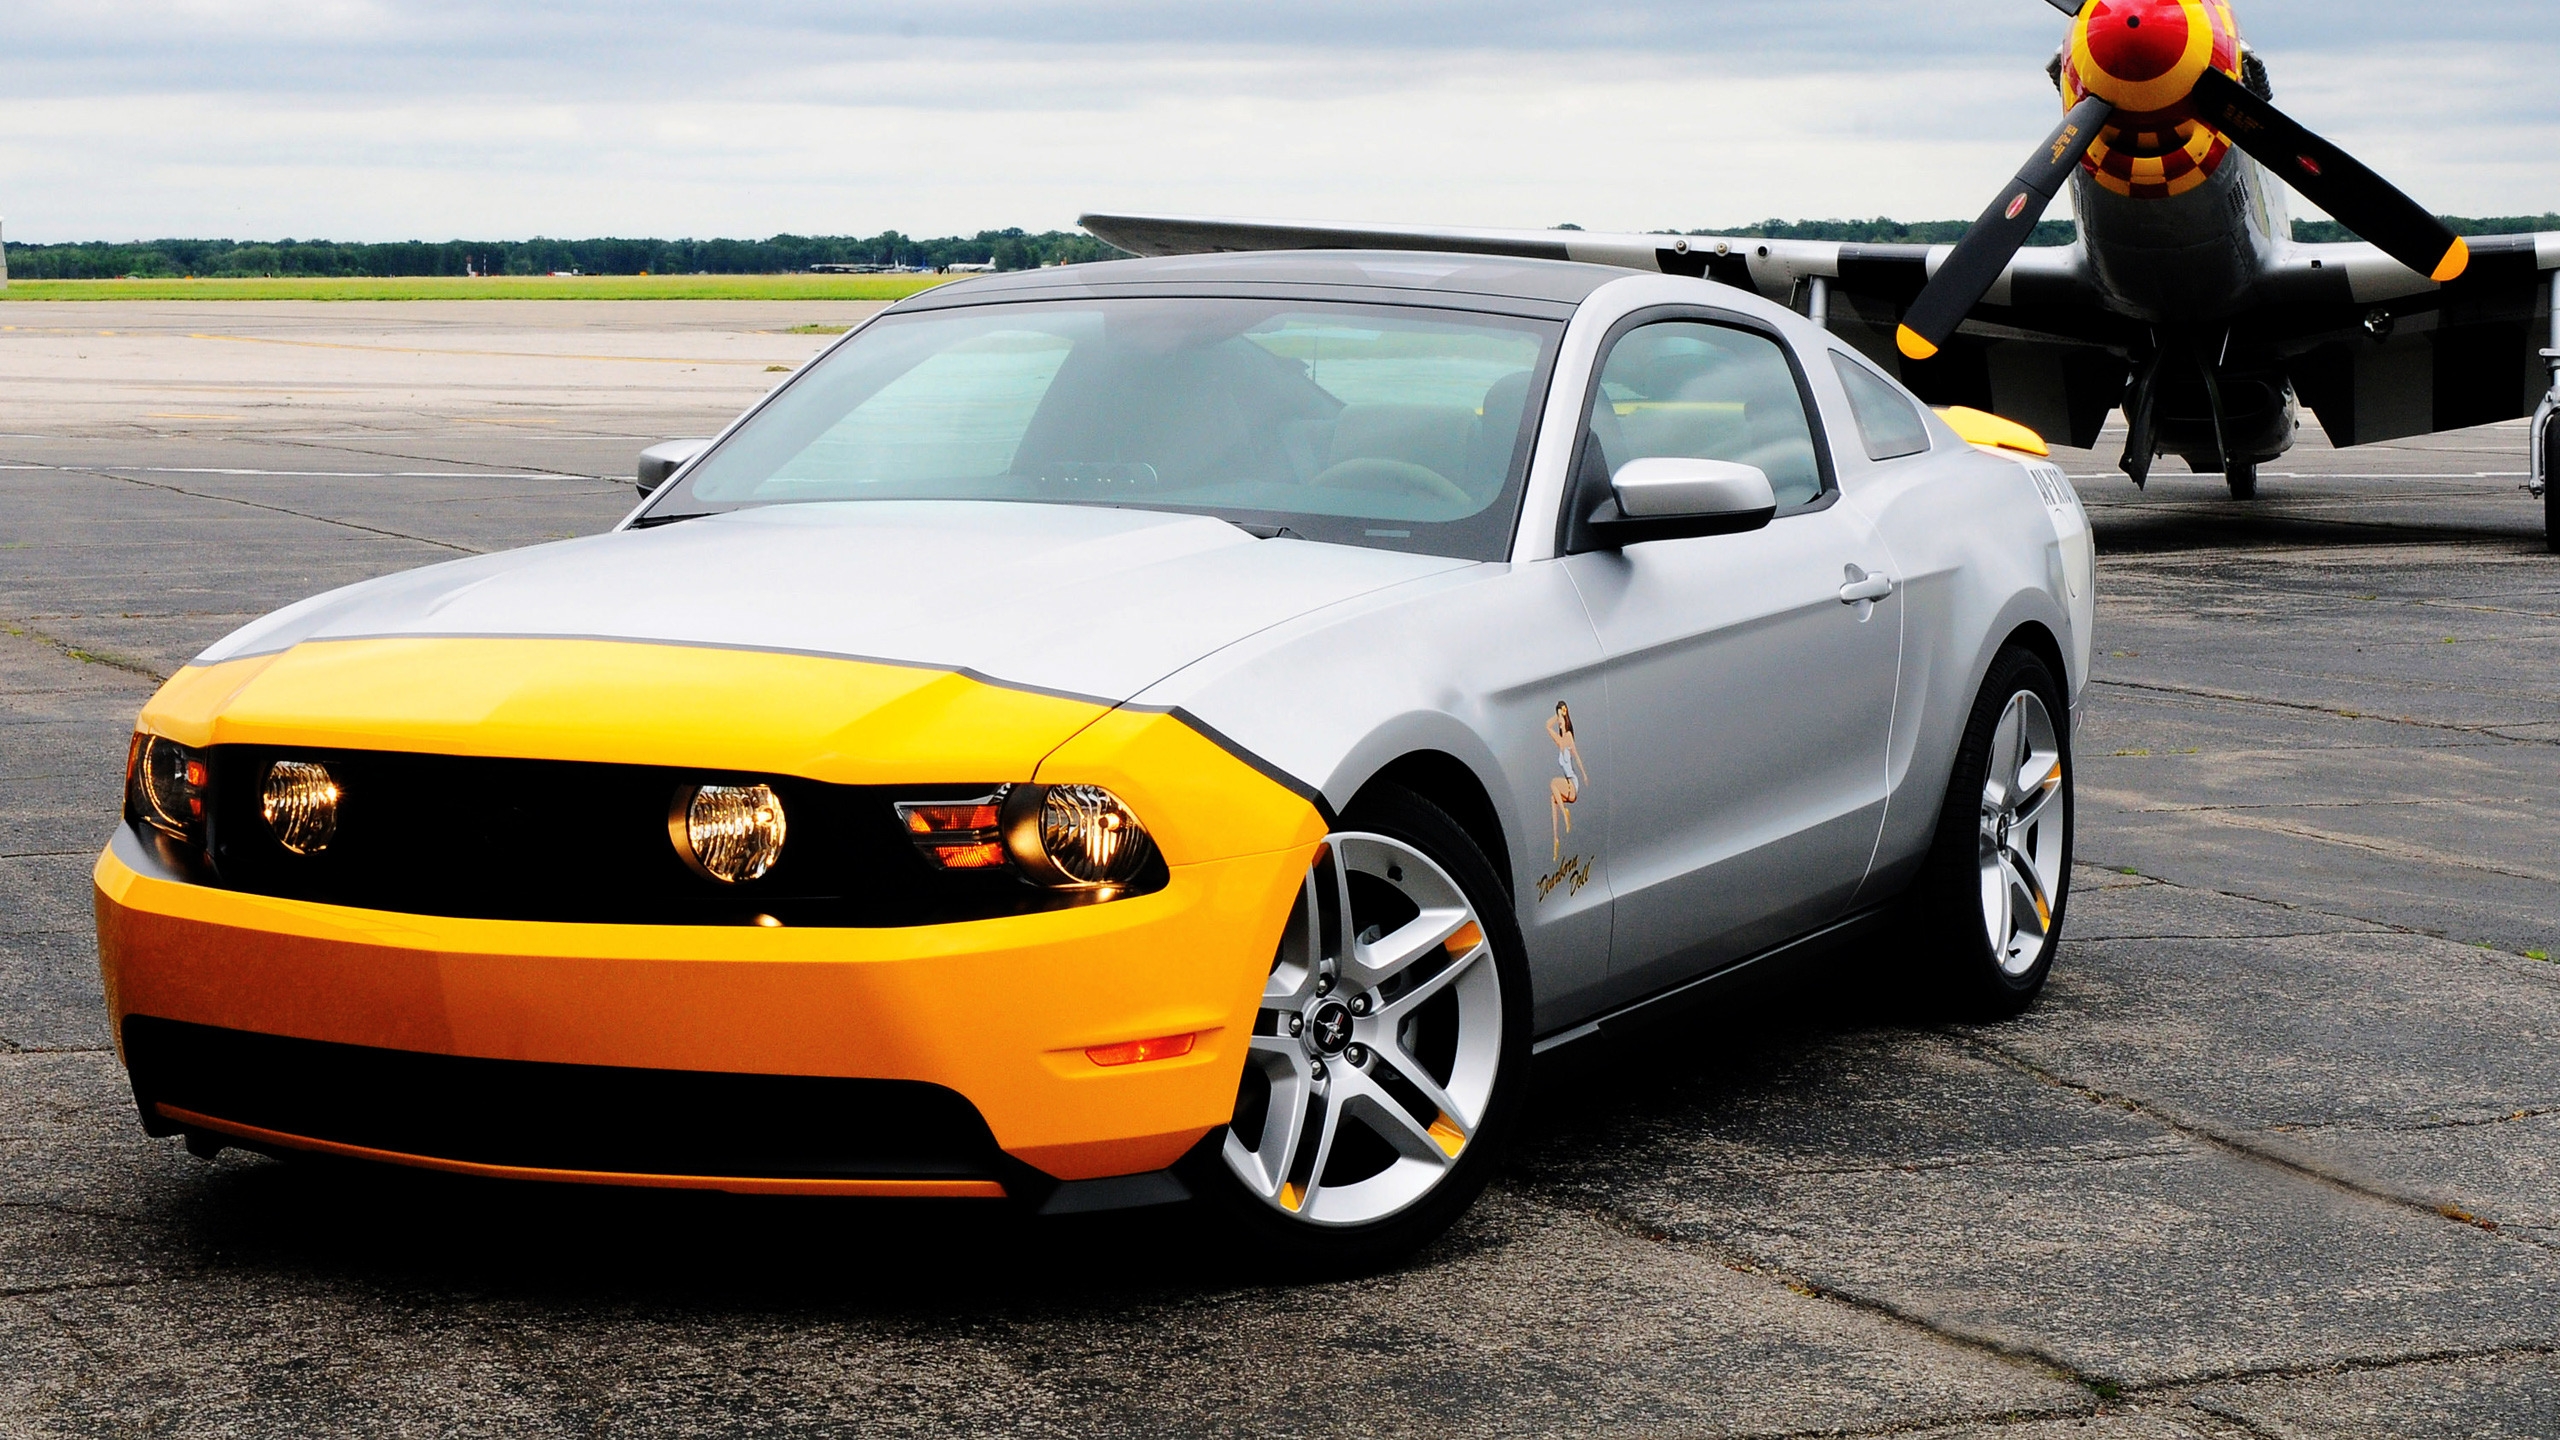 Ford Mustang Dearborn Doll for 2560x1440 HDTV resolution